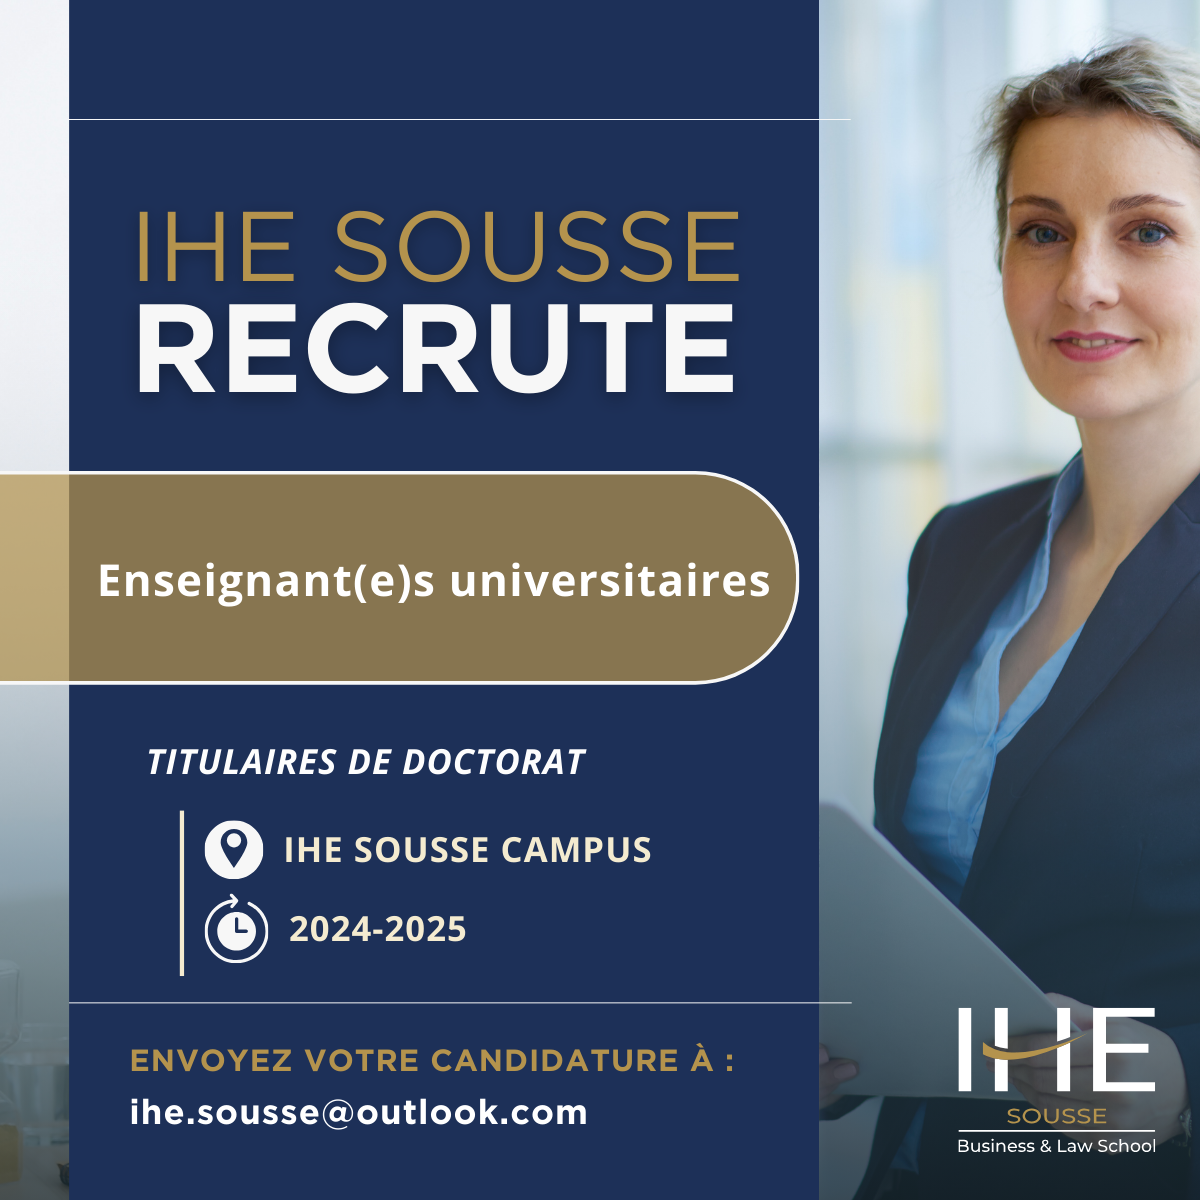 IHE SOUSSE is recruiting teachers for the 2024-2025 academic year